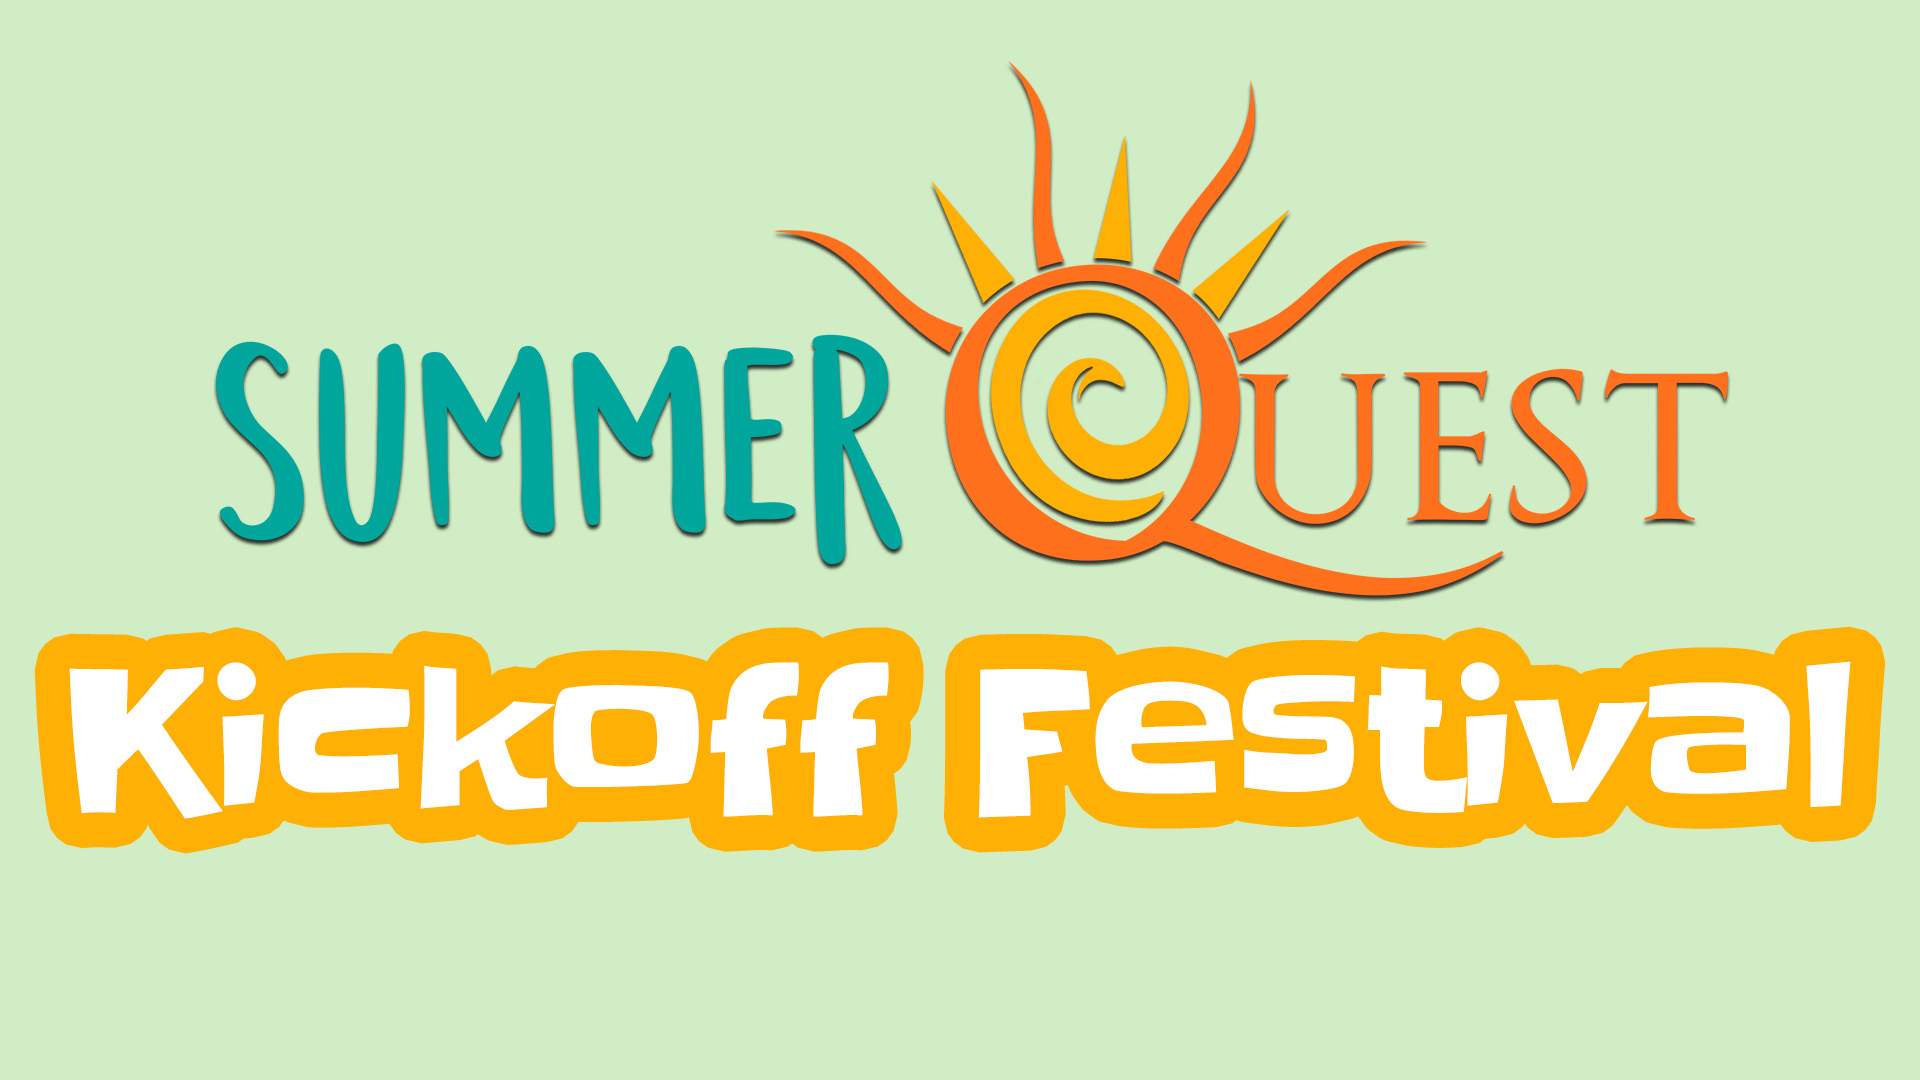 Image reads "SummerQuest Kickoff Festival" against a green textured background.